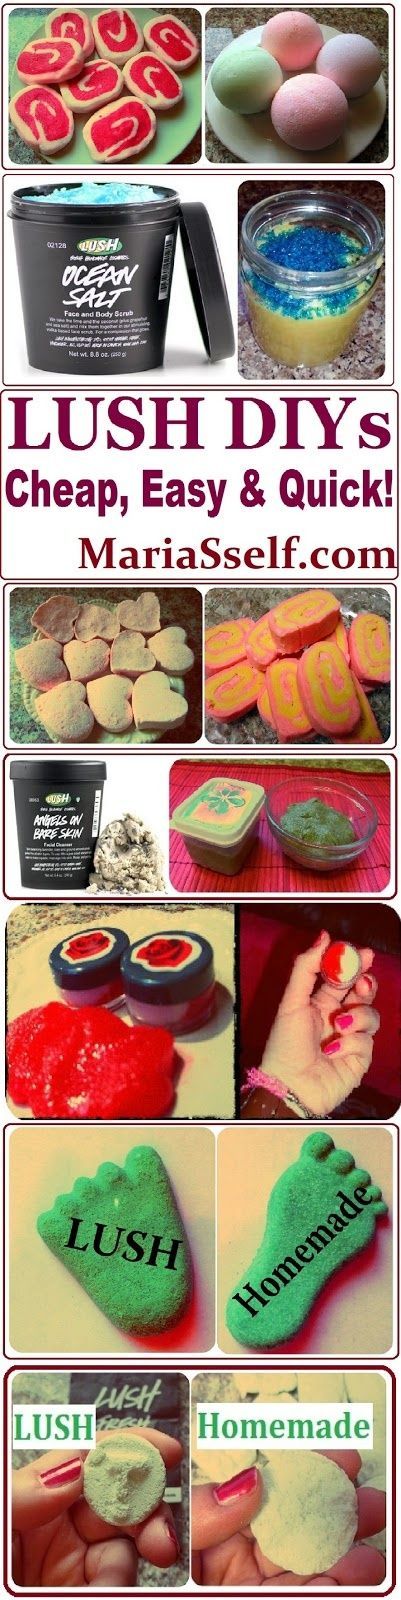 DIY LUSH Product Recipes, How to Make them CHEAP, EASY  QUICK